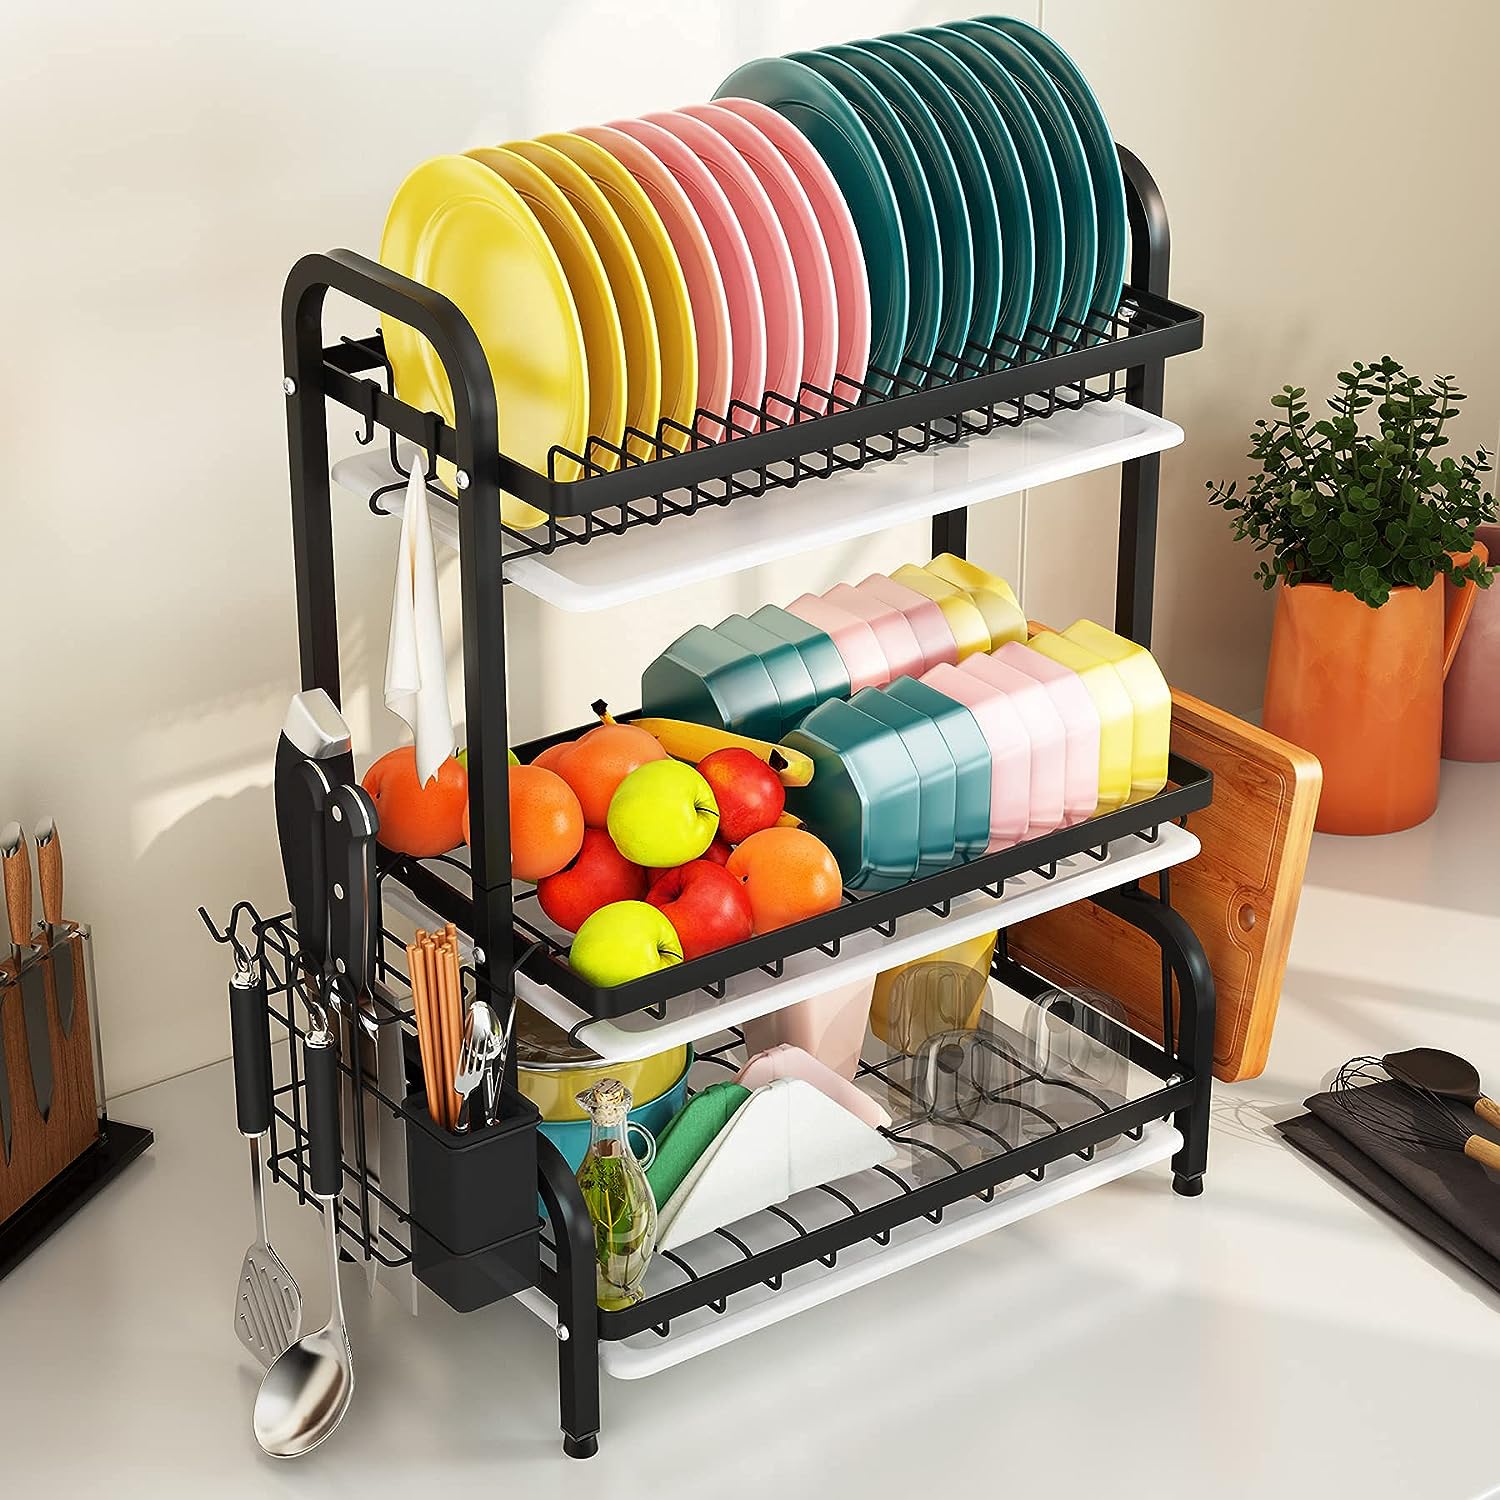 Kitchen Dish Drying Rack with items in it, placed in the kitchen